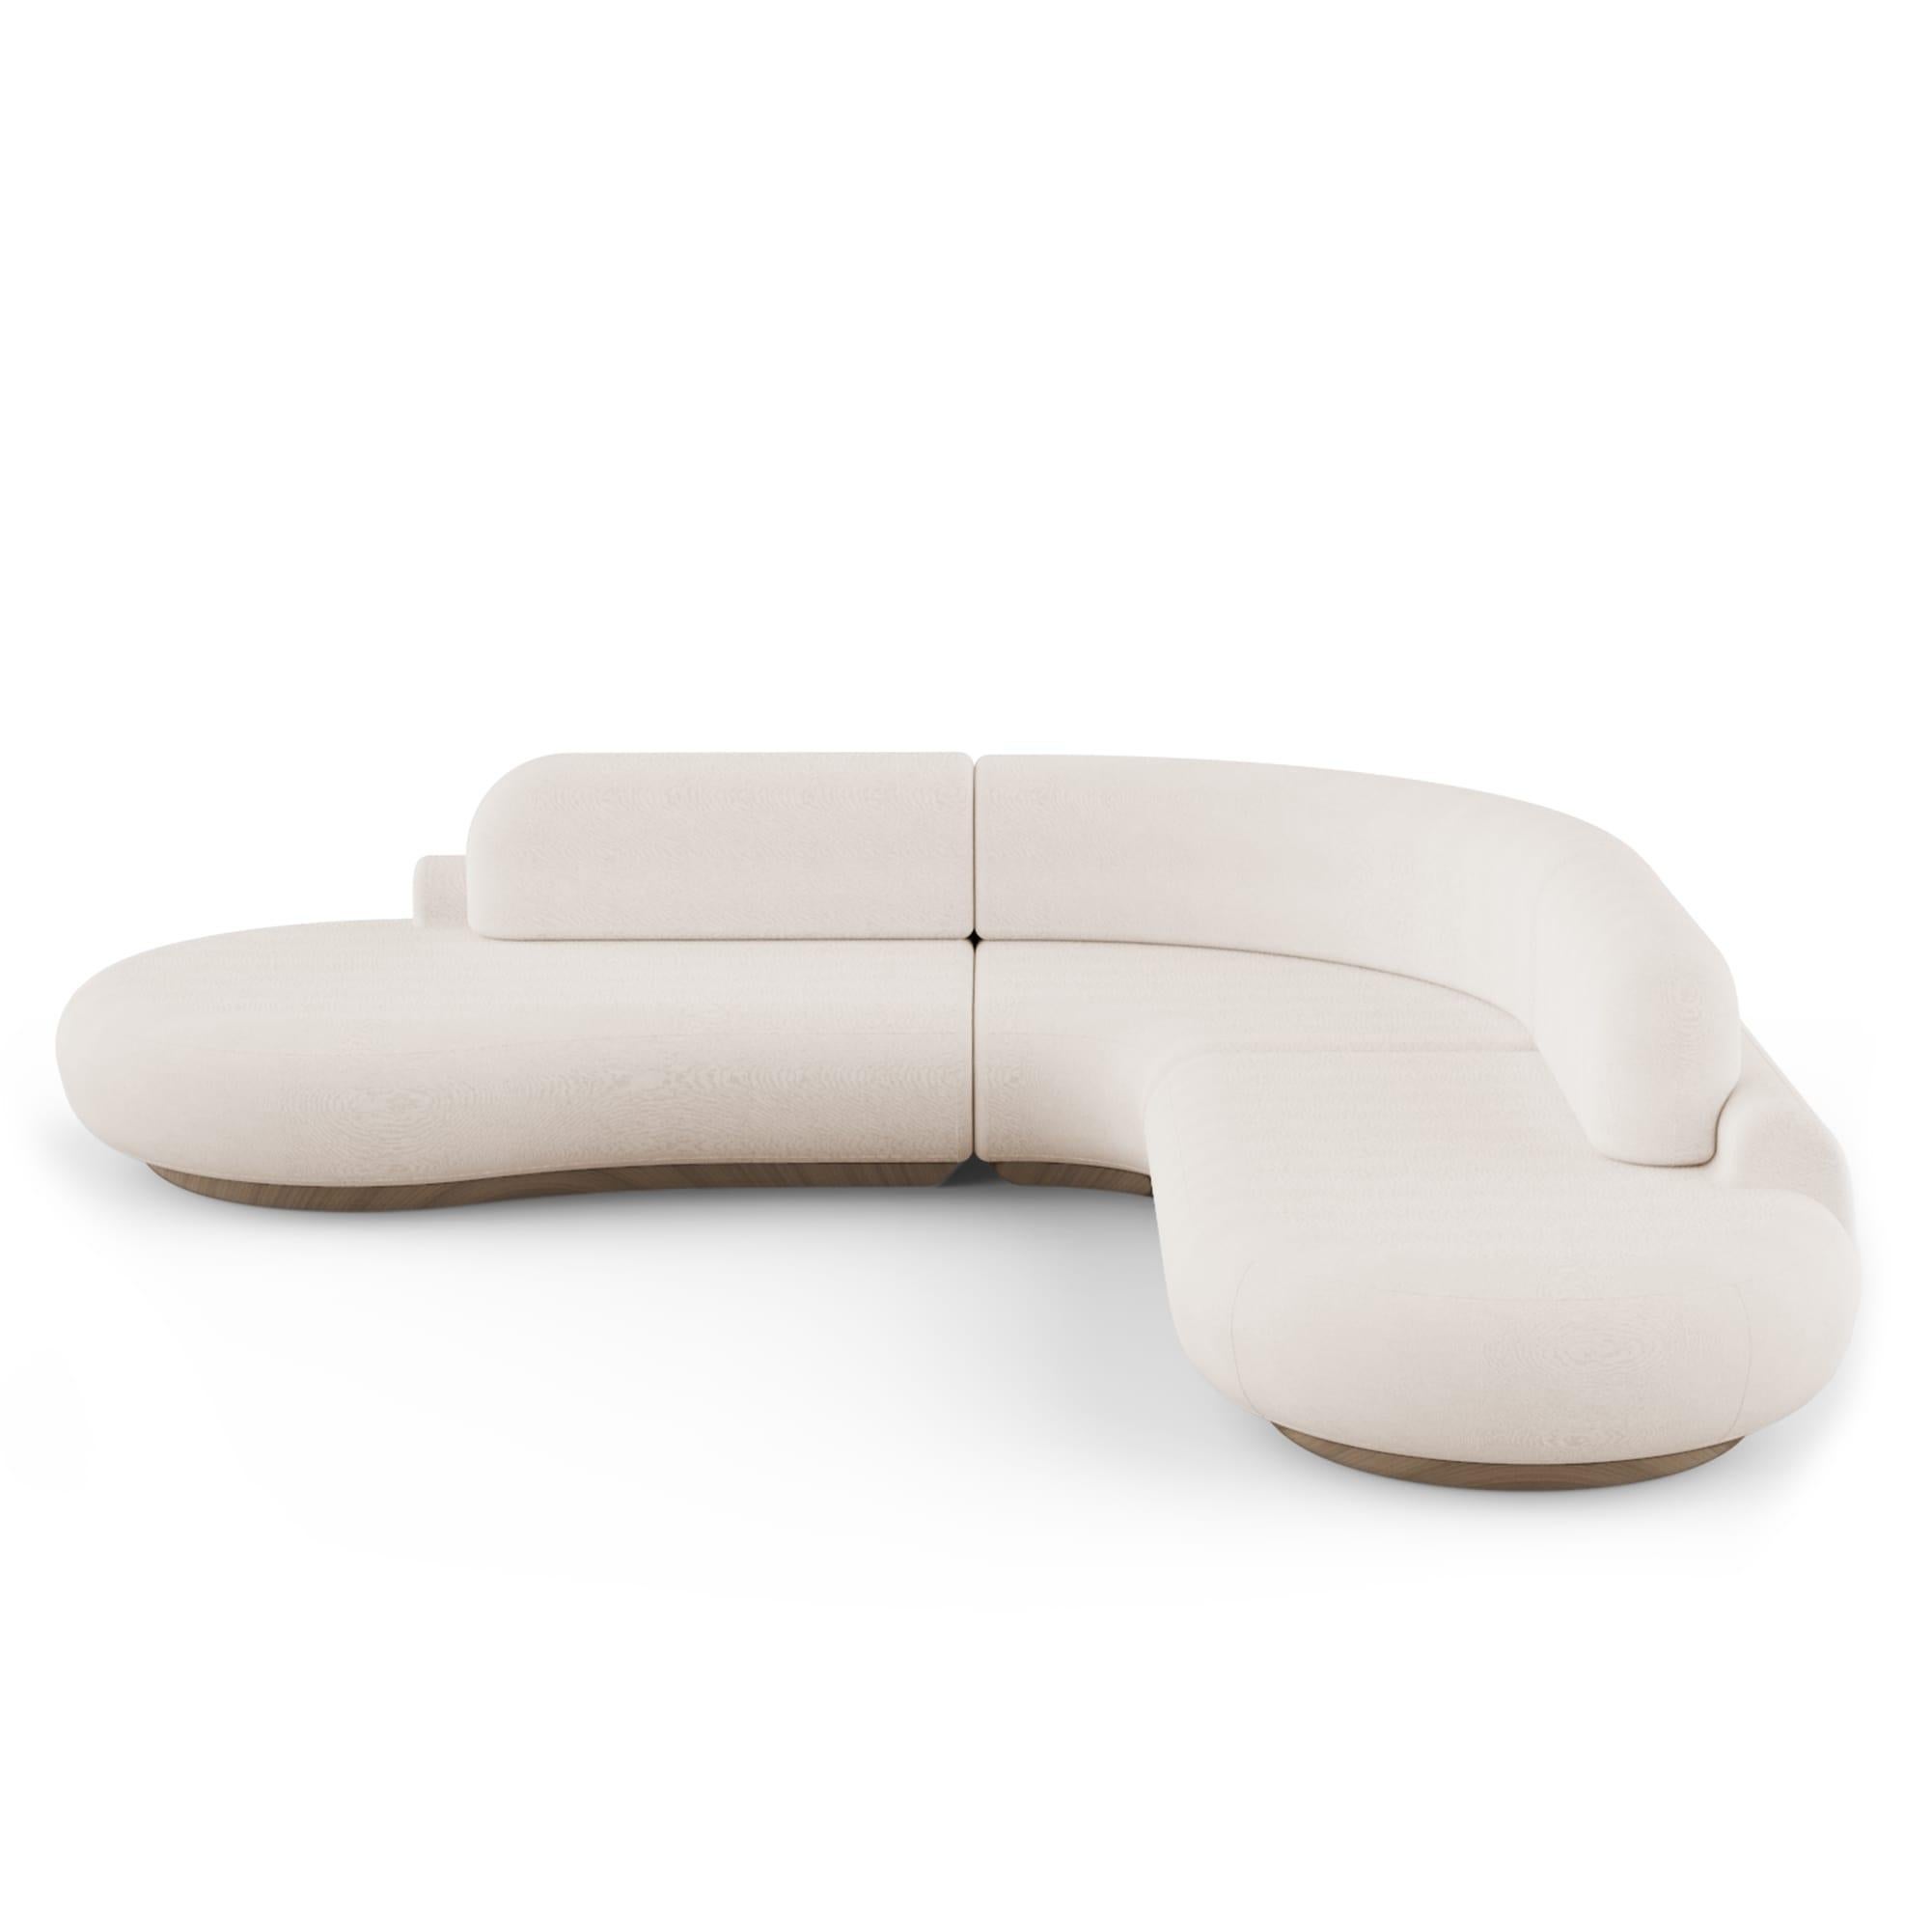 Naked Sofa by Dooq
Dimensions: W 312 x D 332 x H 78 cm.
 Seat height 40 cm.
Materials: base beechwood.
 Upholstery smooth velvet 
 Also avalaible in synthetic leather.

Naked sofa reveals sculptural and organic shape meant to embrace the user and